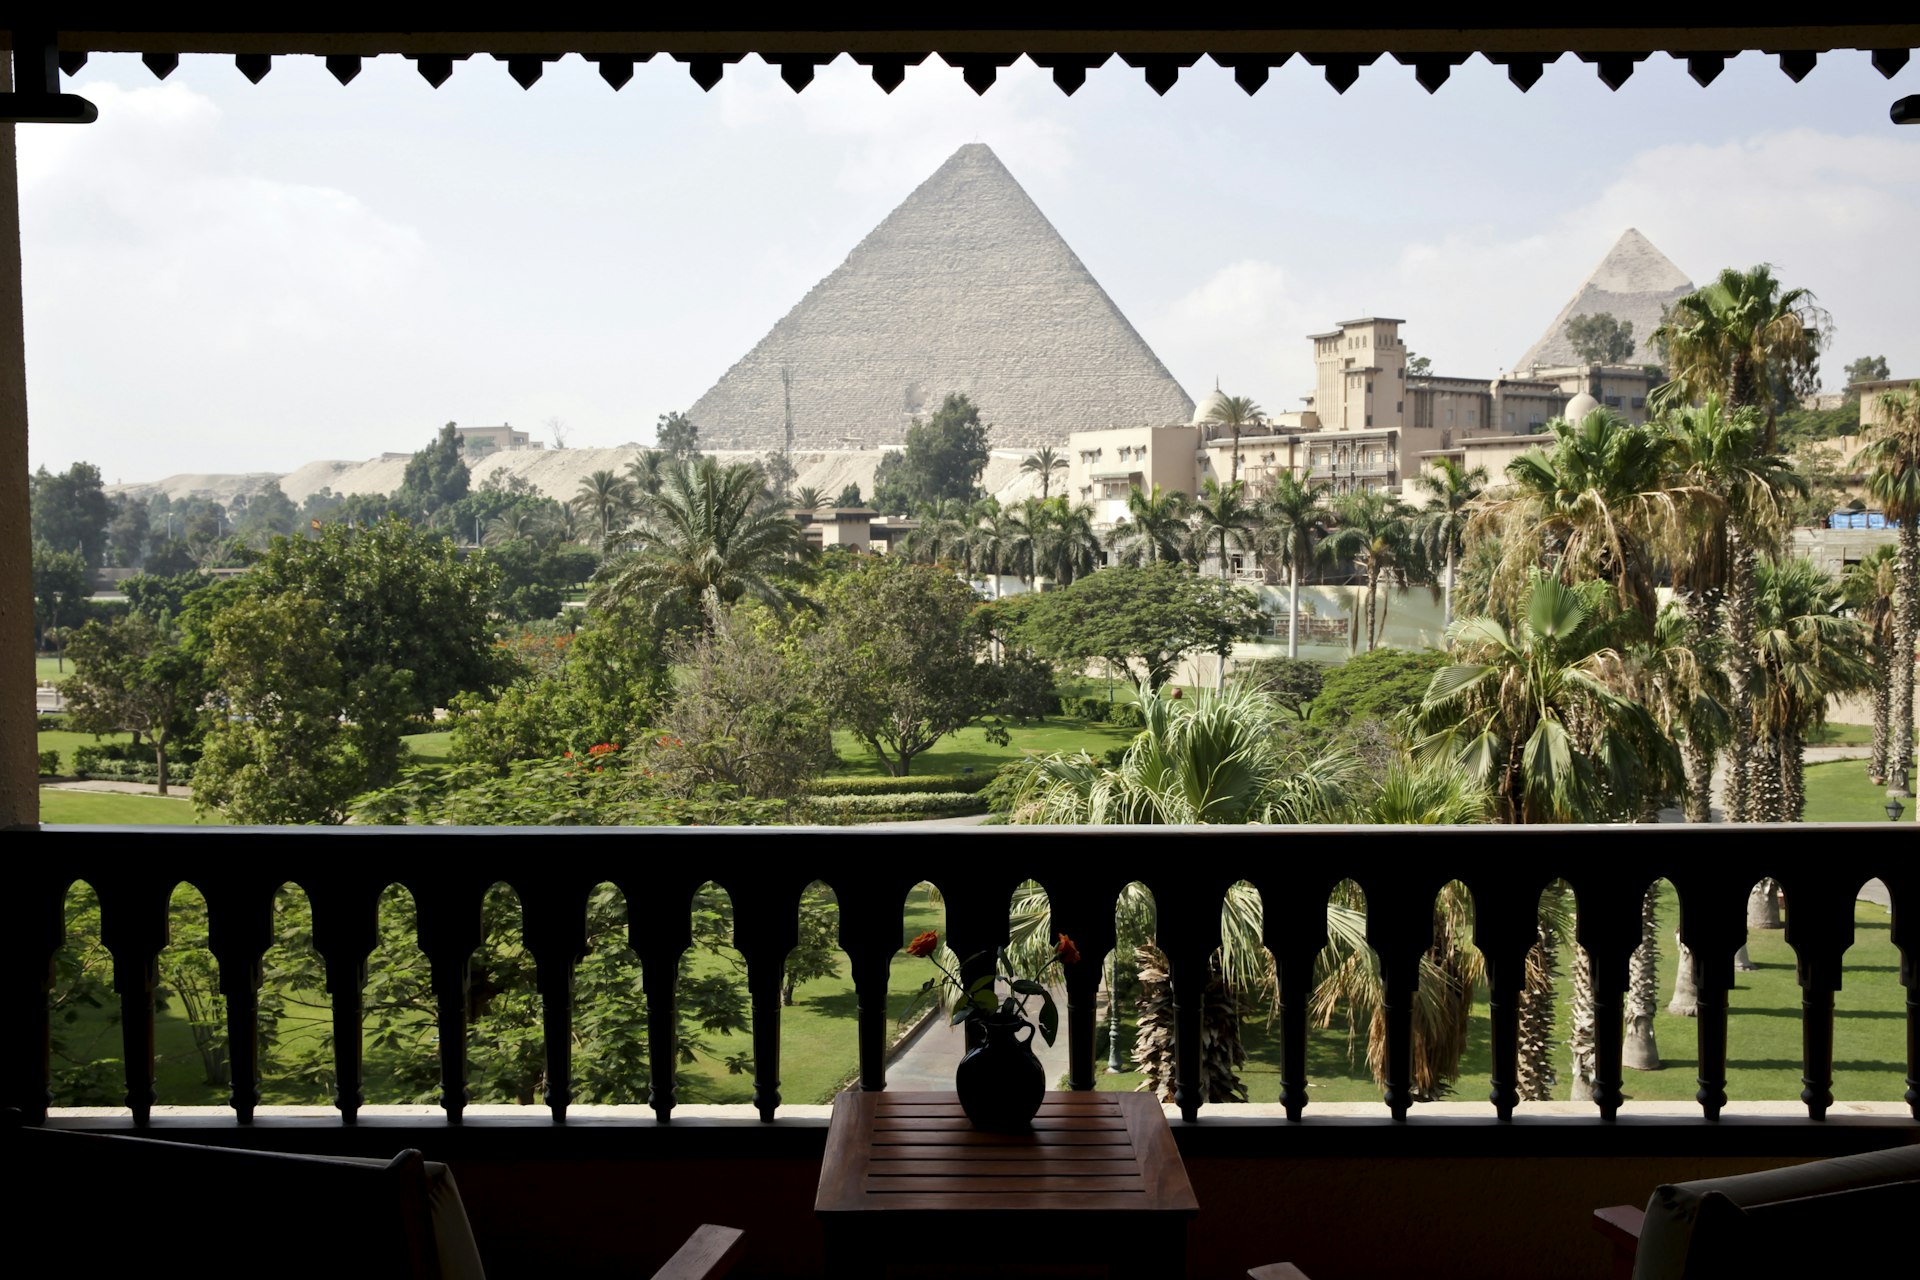 The ancient pyramids of Giza are seen from a hotel room beyond the gardens of the Mena House hotel in Cairo, Egypt. 